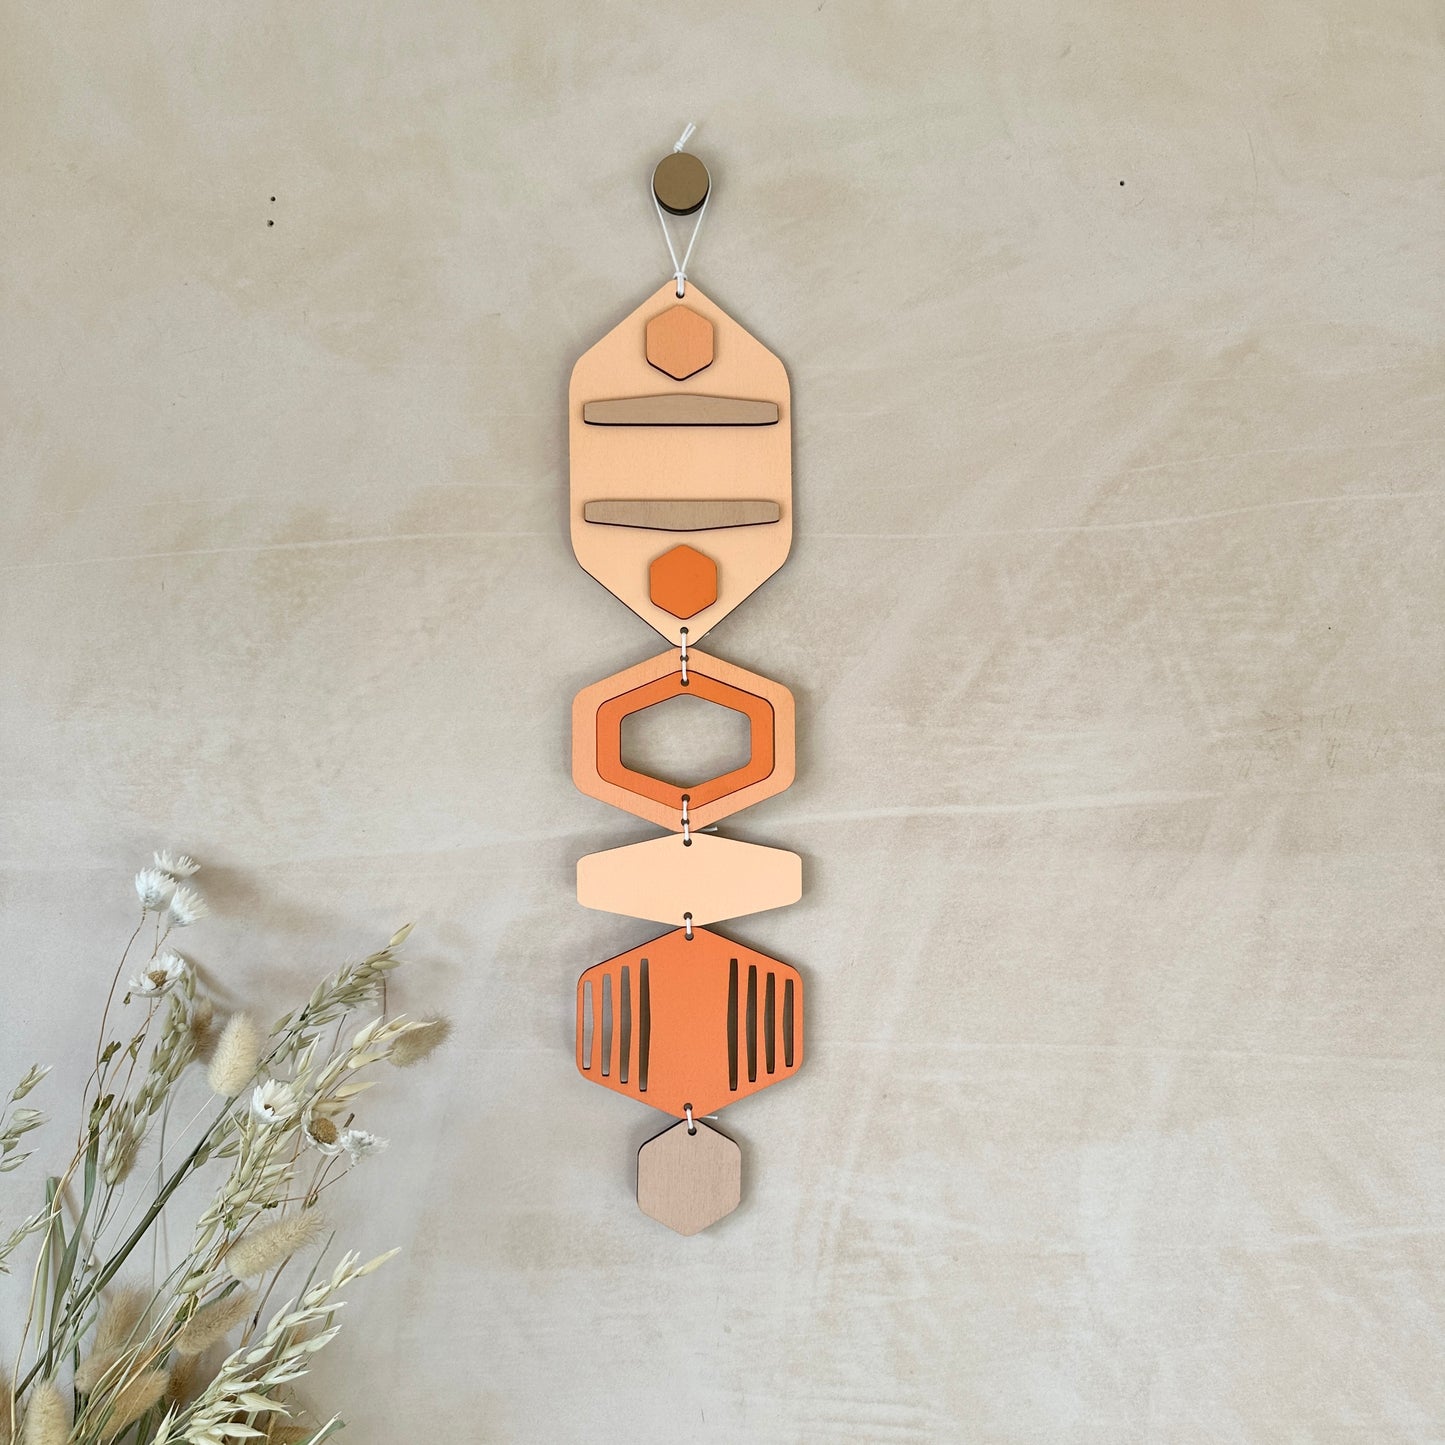 Hexagon Wall Hanging - Orange Bright Wall Art - Hand Painted Art - Home Gift For Them - New Home Decor Gift - Coral Decor - New Home Gift